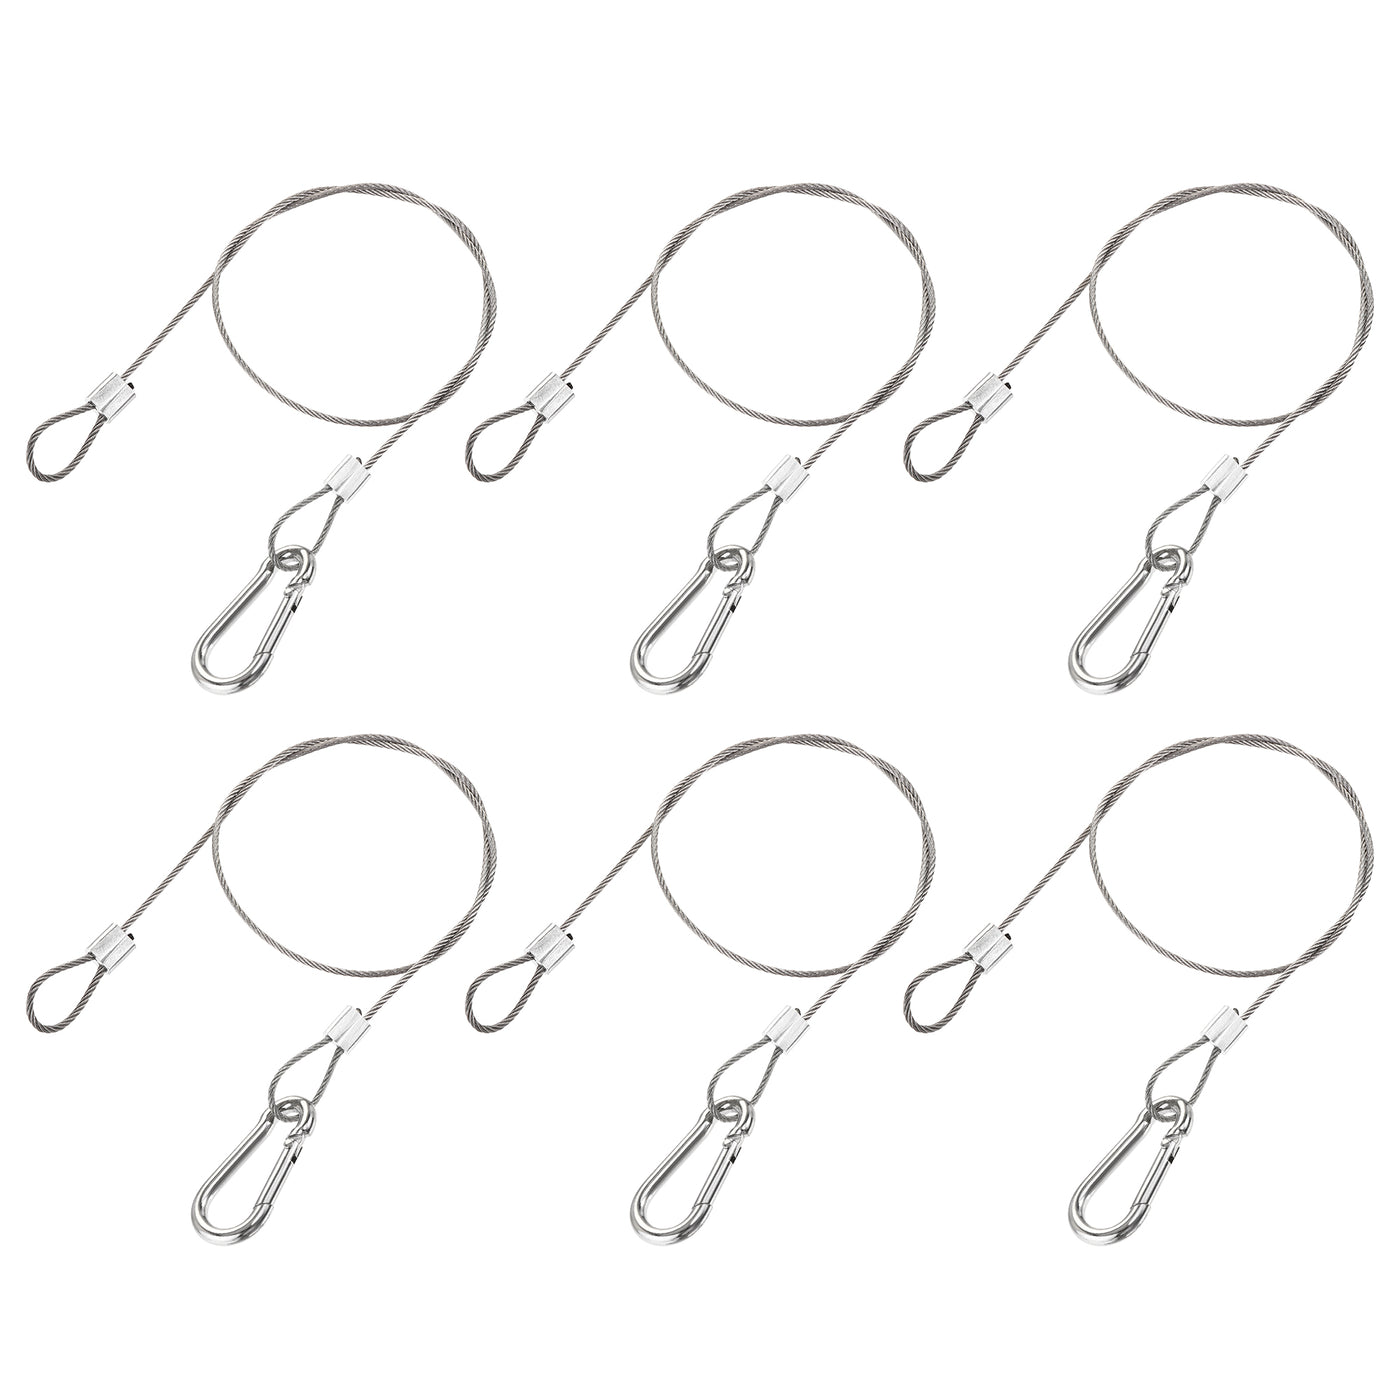 uxcell Uxcell Picture Hanging Wire Kit, 6Set 0.5M Loop and Hook Hanging Wire for Home Picture Art Gallery Picture Display Kit, Load 66 lbs